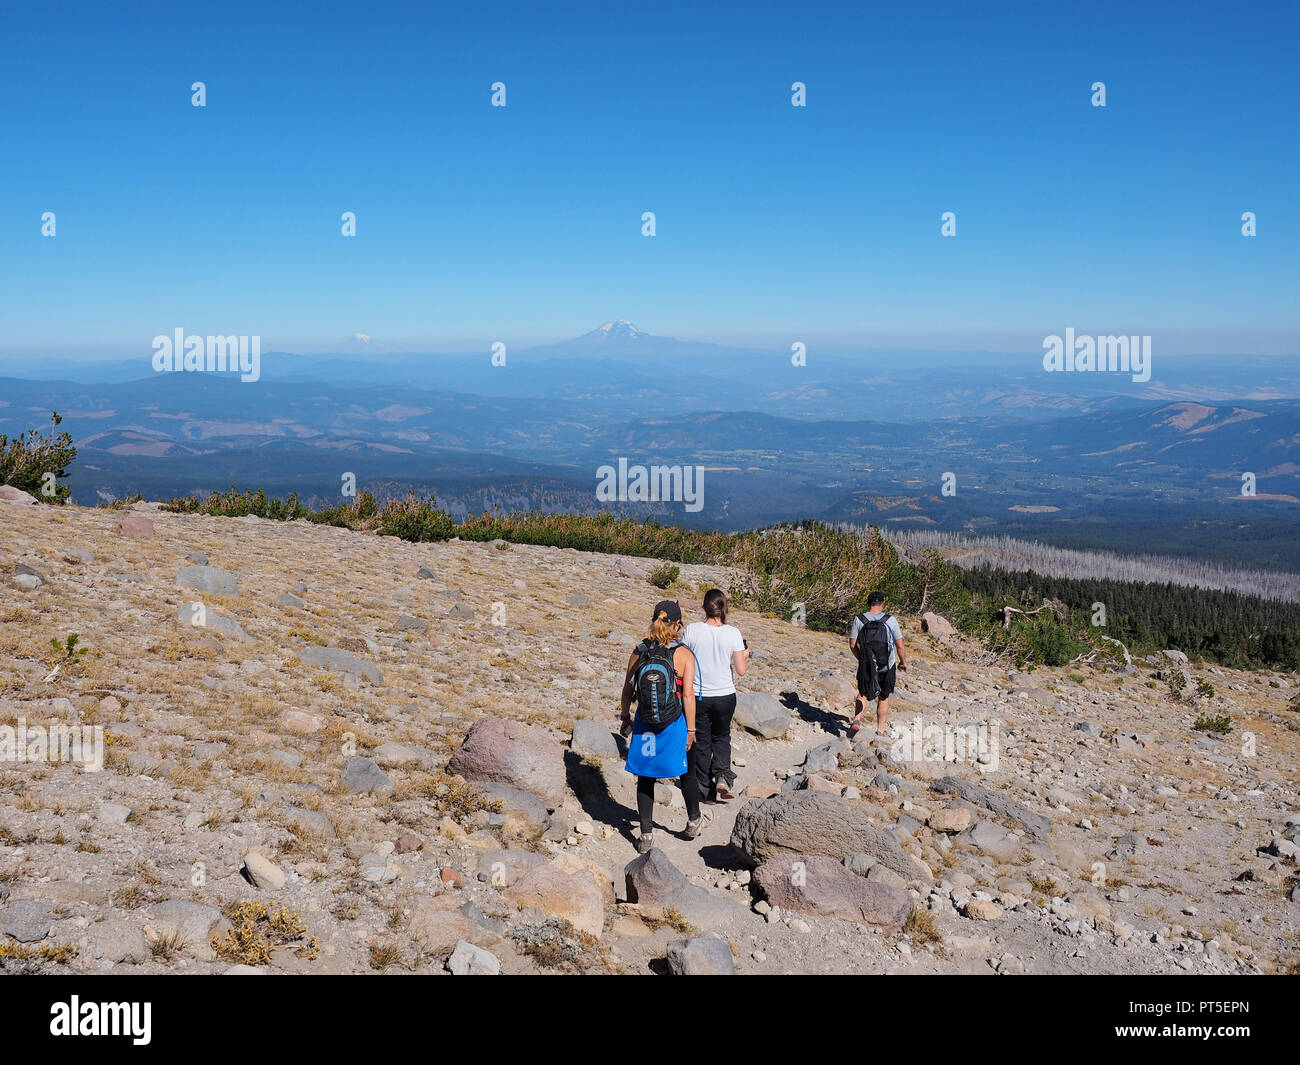 Hikers on the Timberline Trail on Mount Hood, Oregon, with distant views of Mount Jefferson and Mount Rainier in the background on a very clear day. Stock Photo